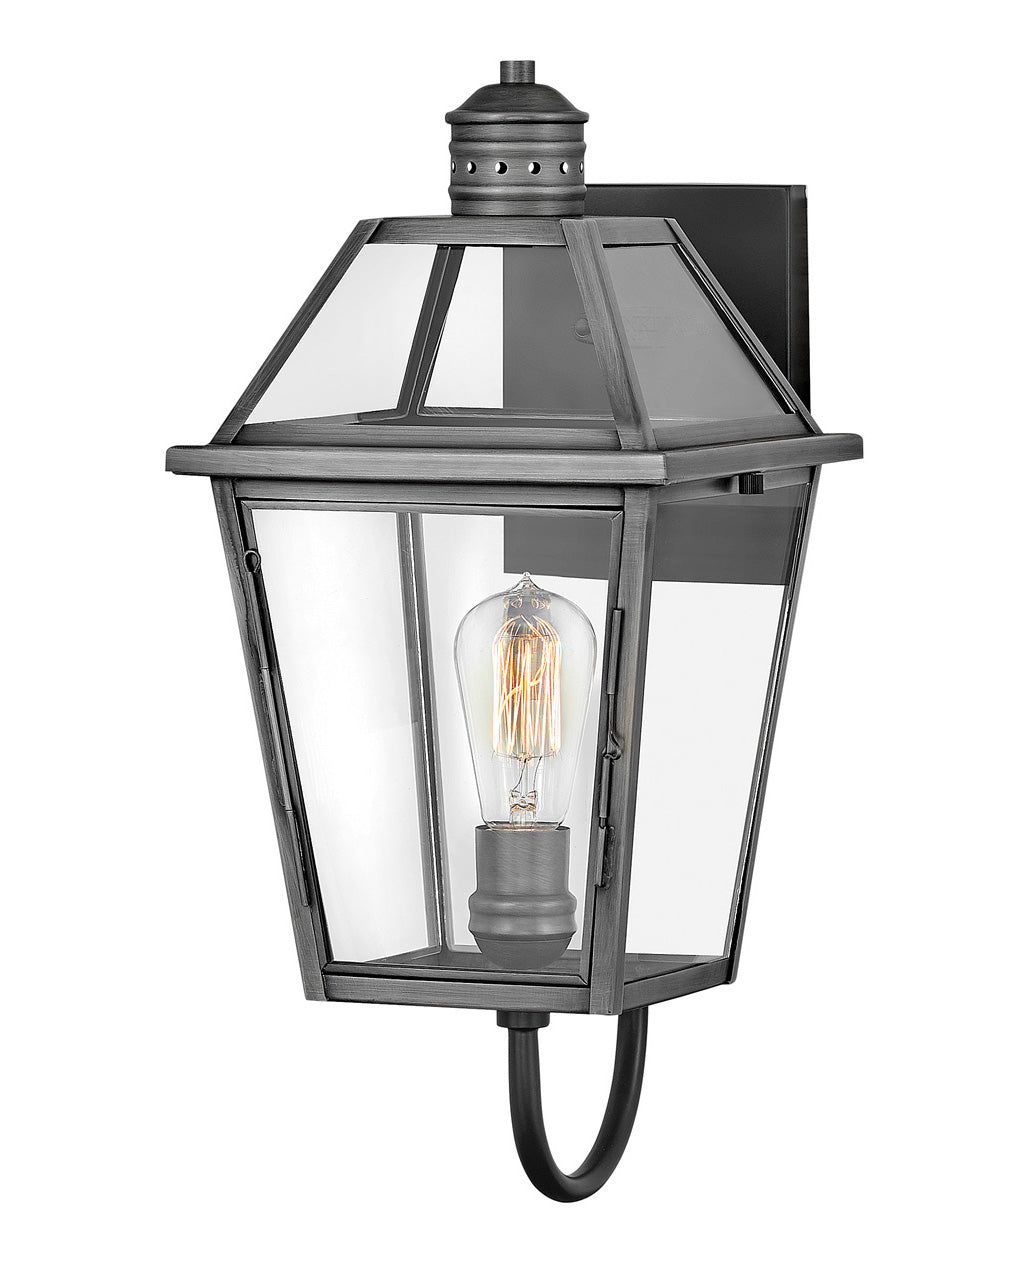 OUTDOOR NOUVELLE Wall Mount Lantern